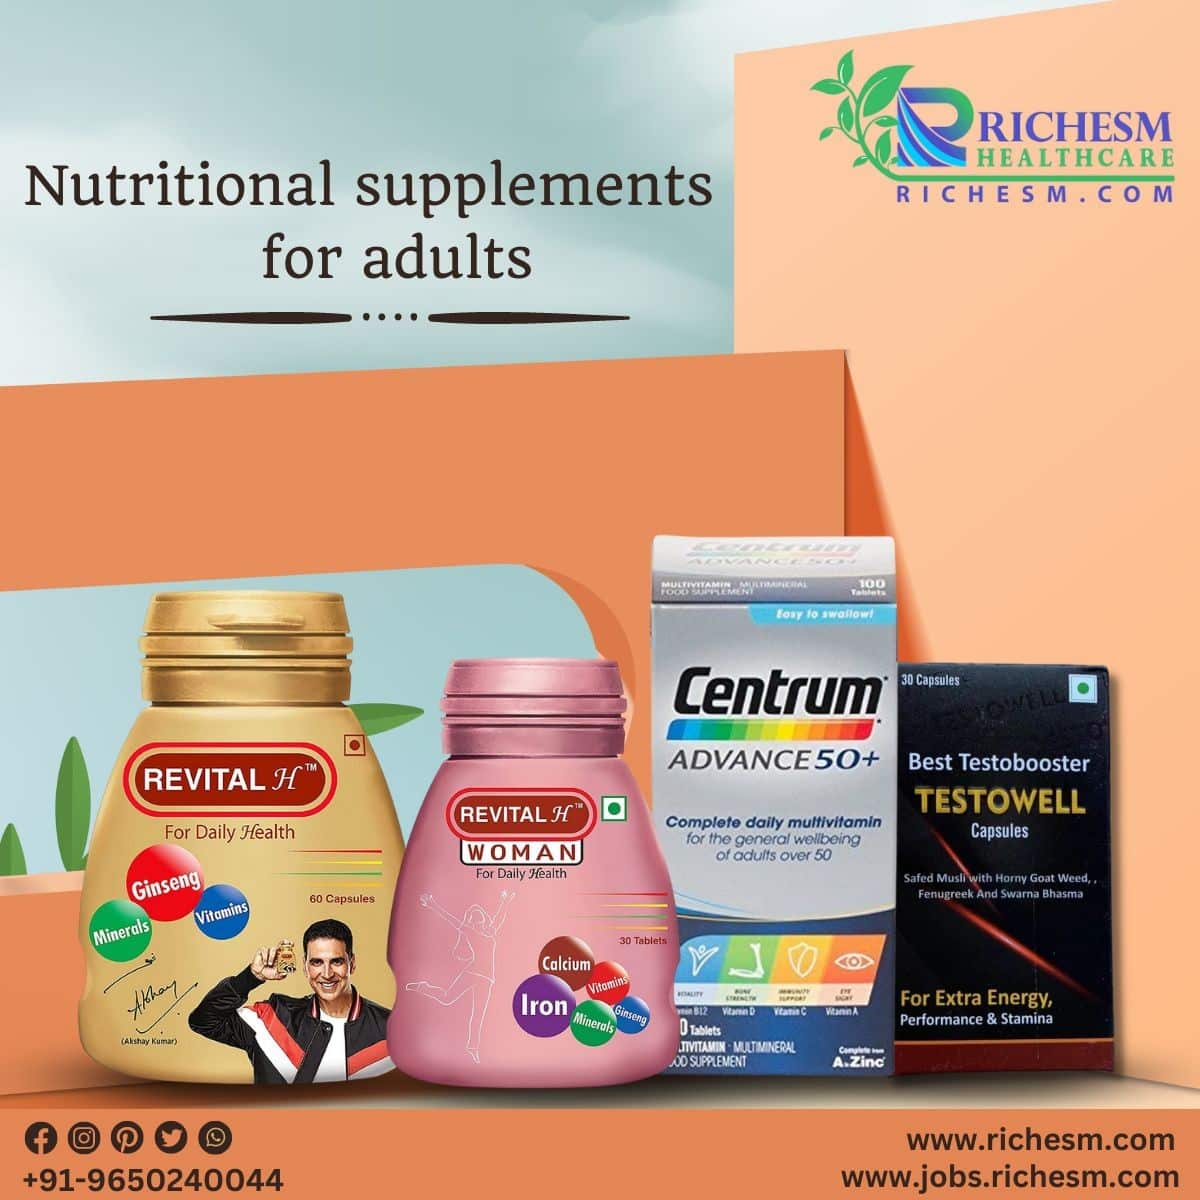 Add Care To Your Cart With Nutritional Supplements